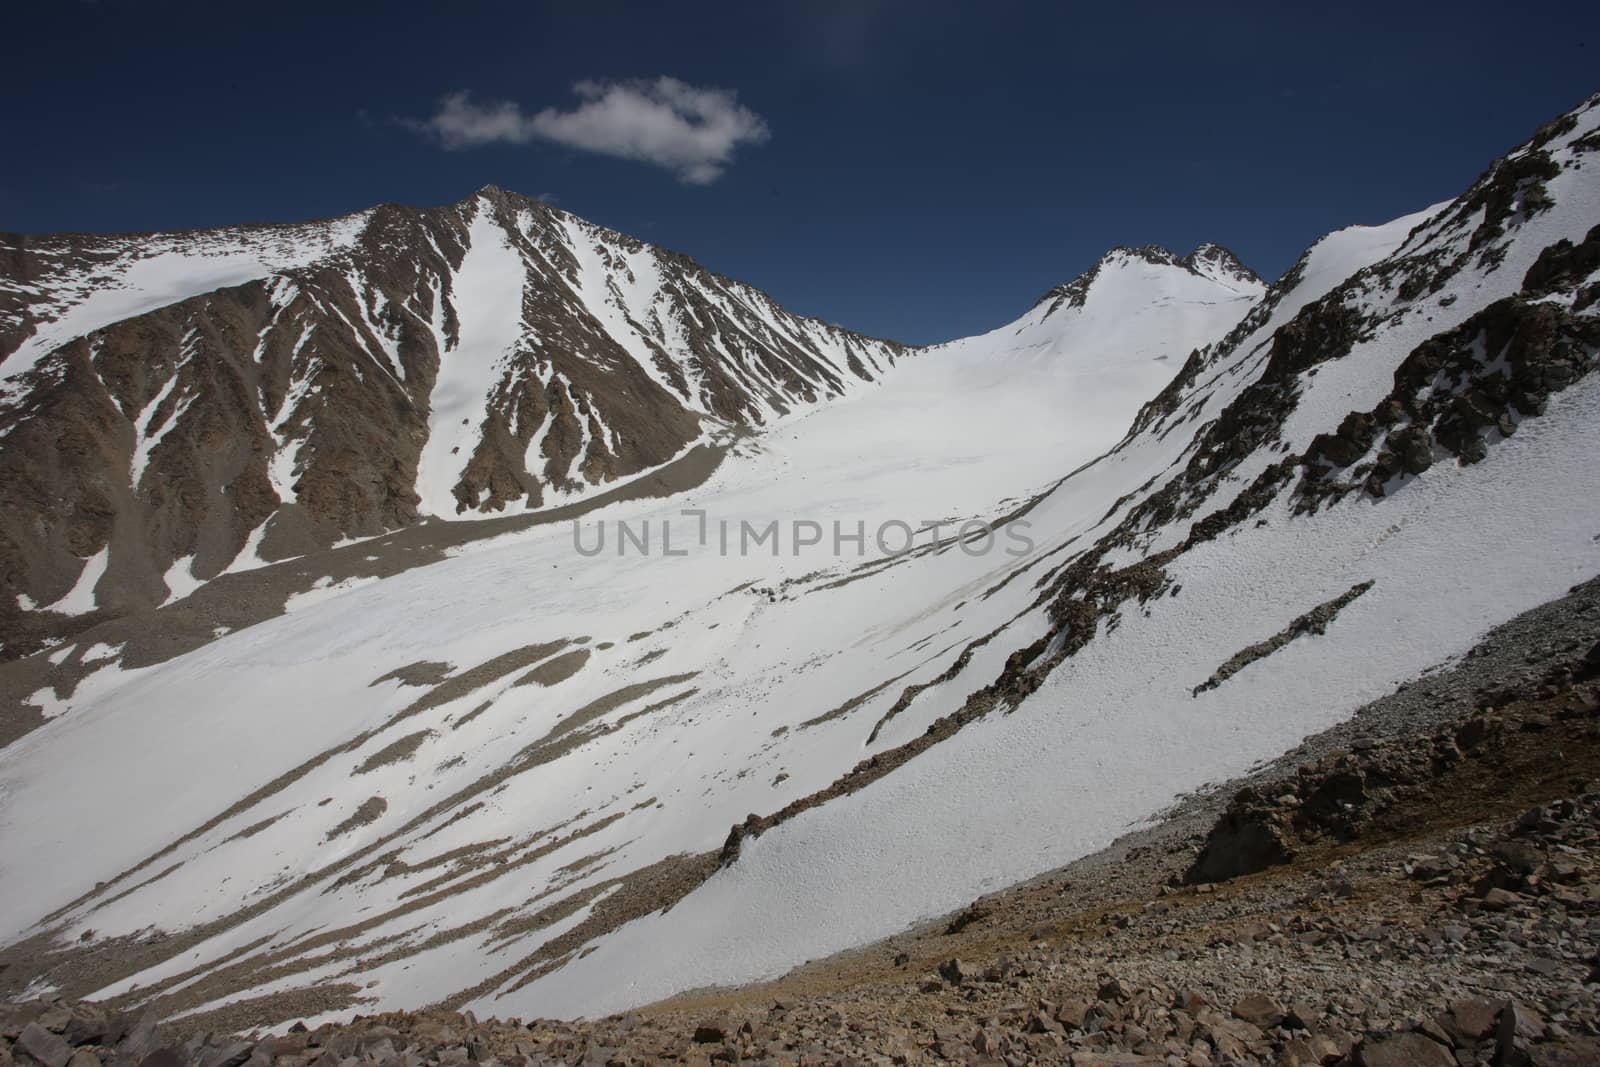 Pamir Russia Central Asia mountain landscapes by desant7474